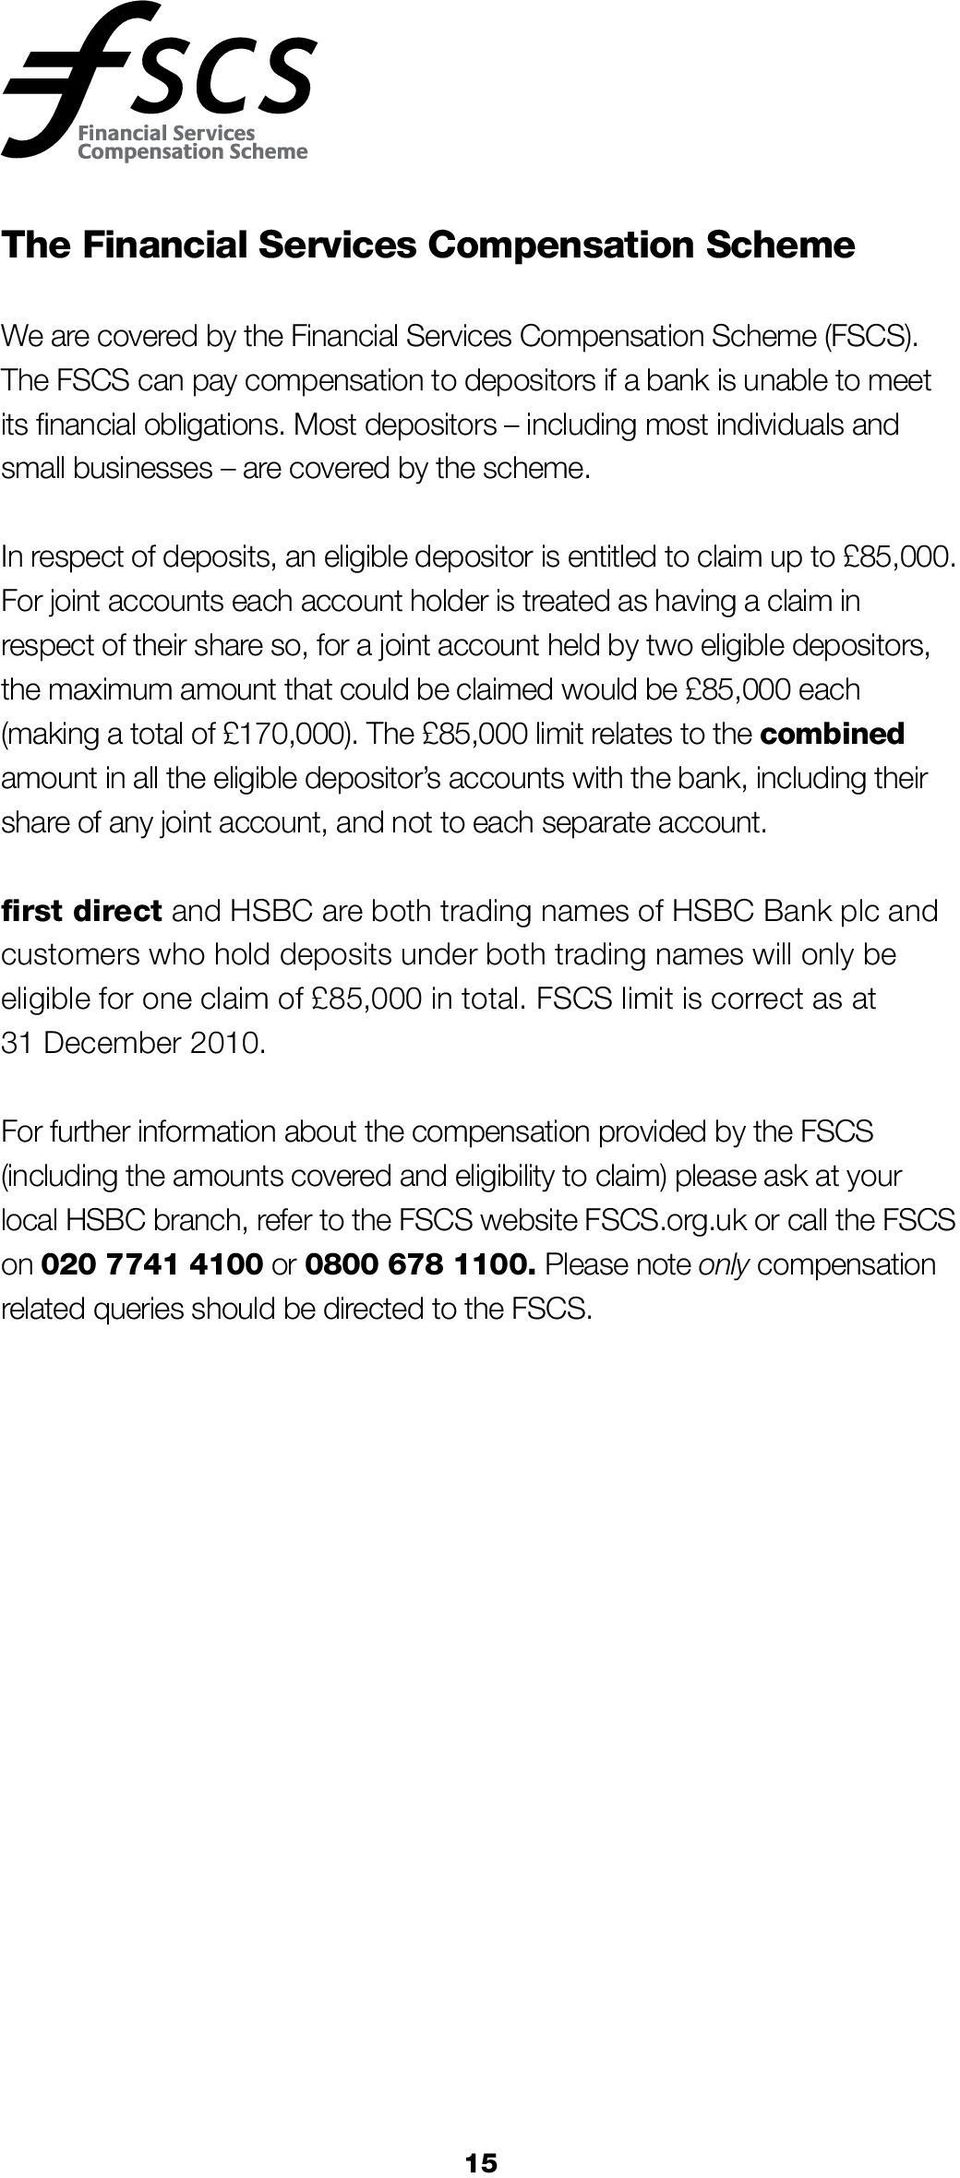 In respect of deposits, an eligible depositor is entitled to claim up to 85,000.